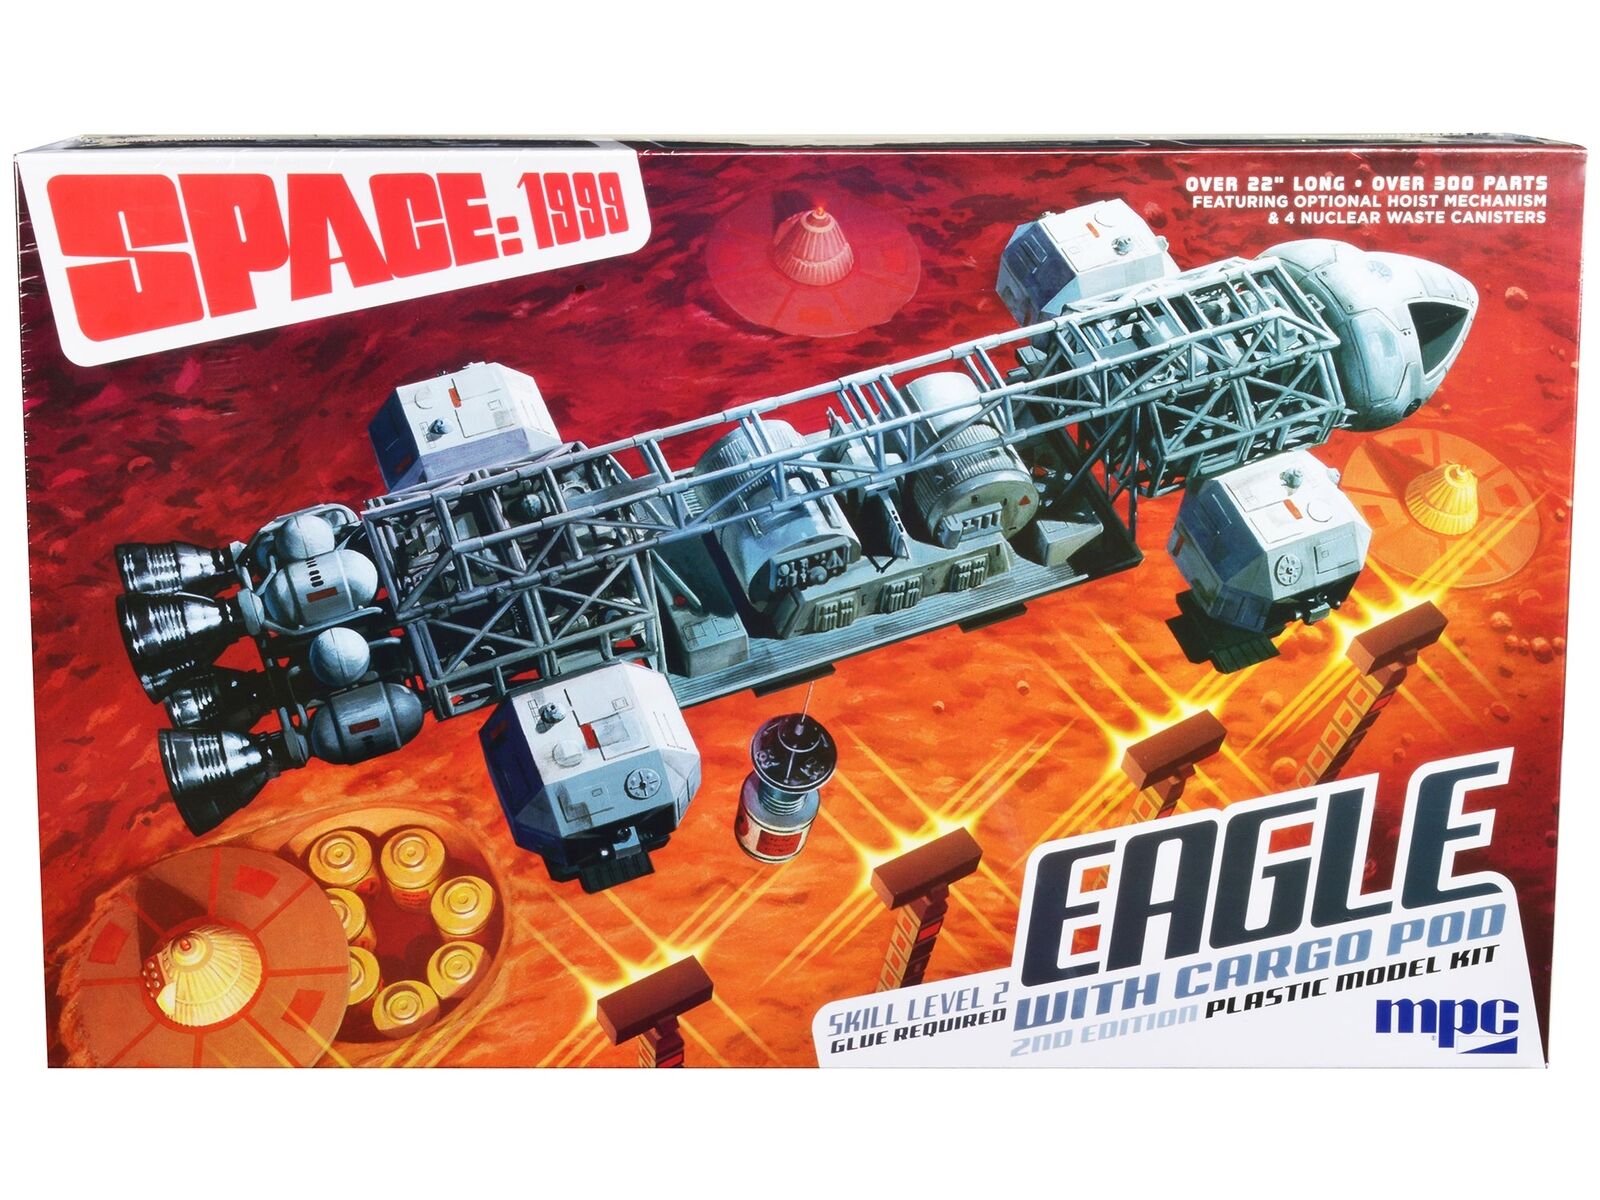 Model Kit Eagle Spacecraft Pod 2nd Space 1999 1975-1977 1/48